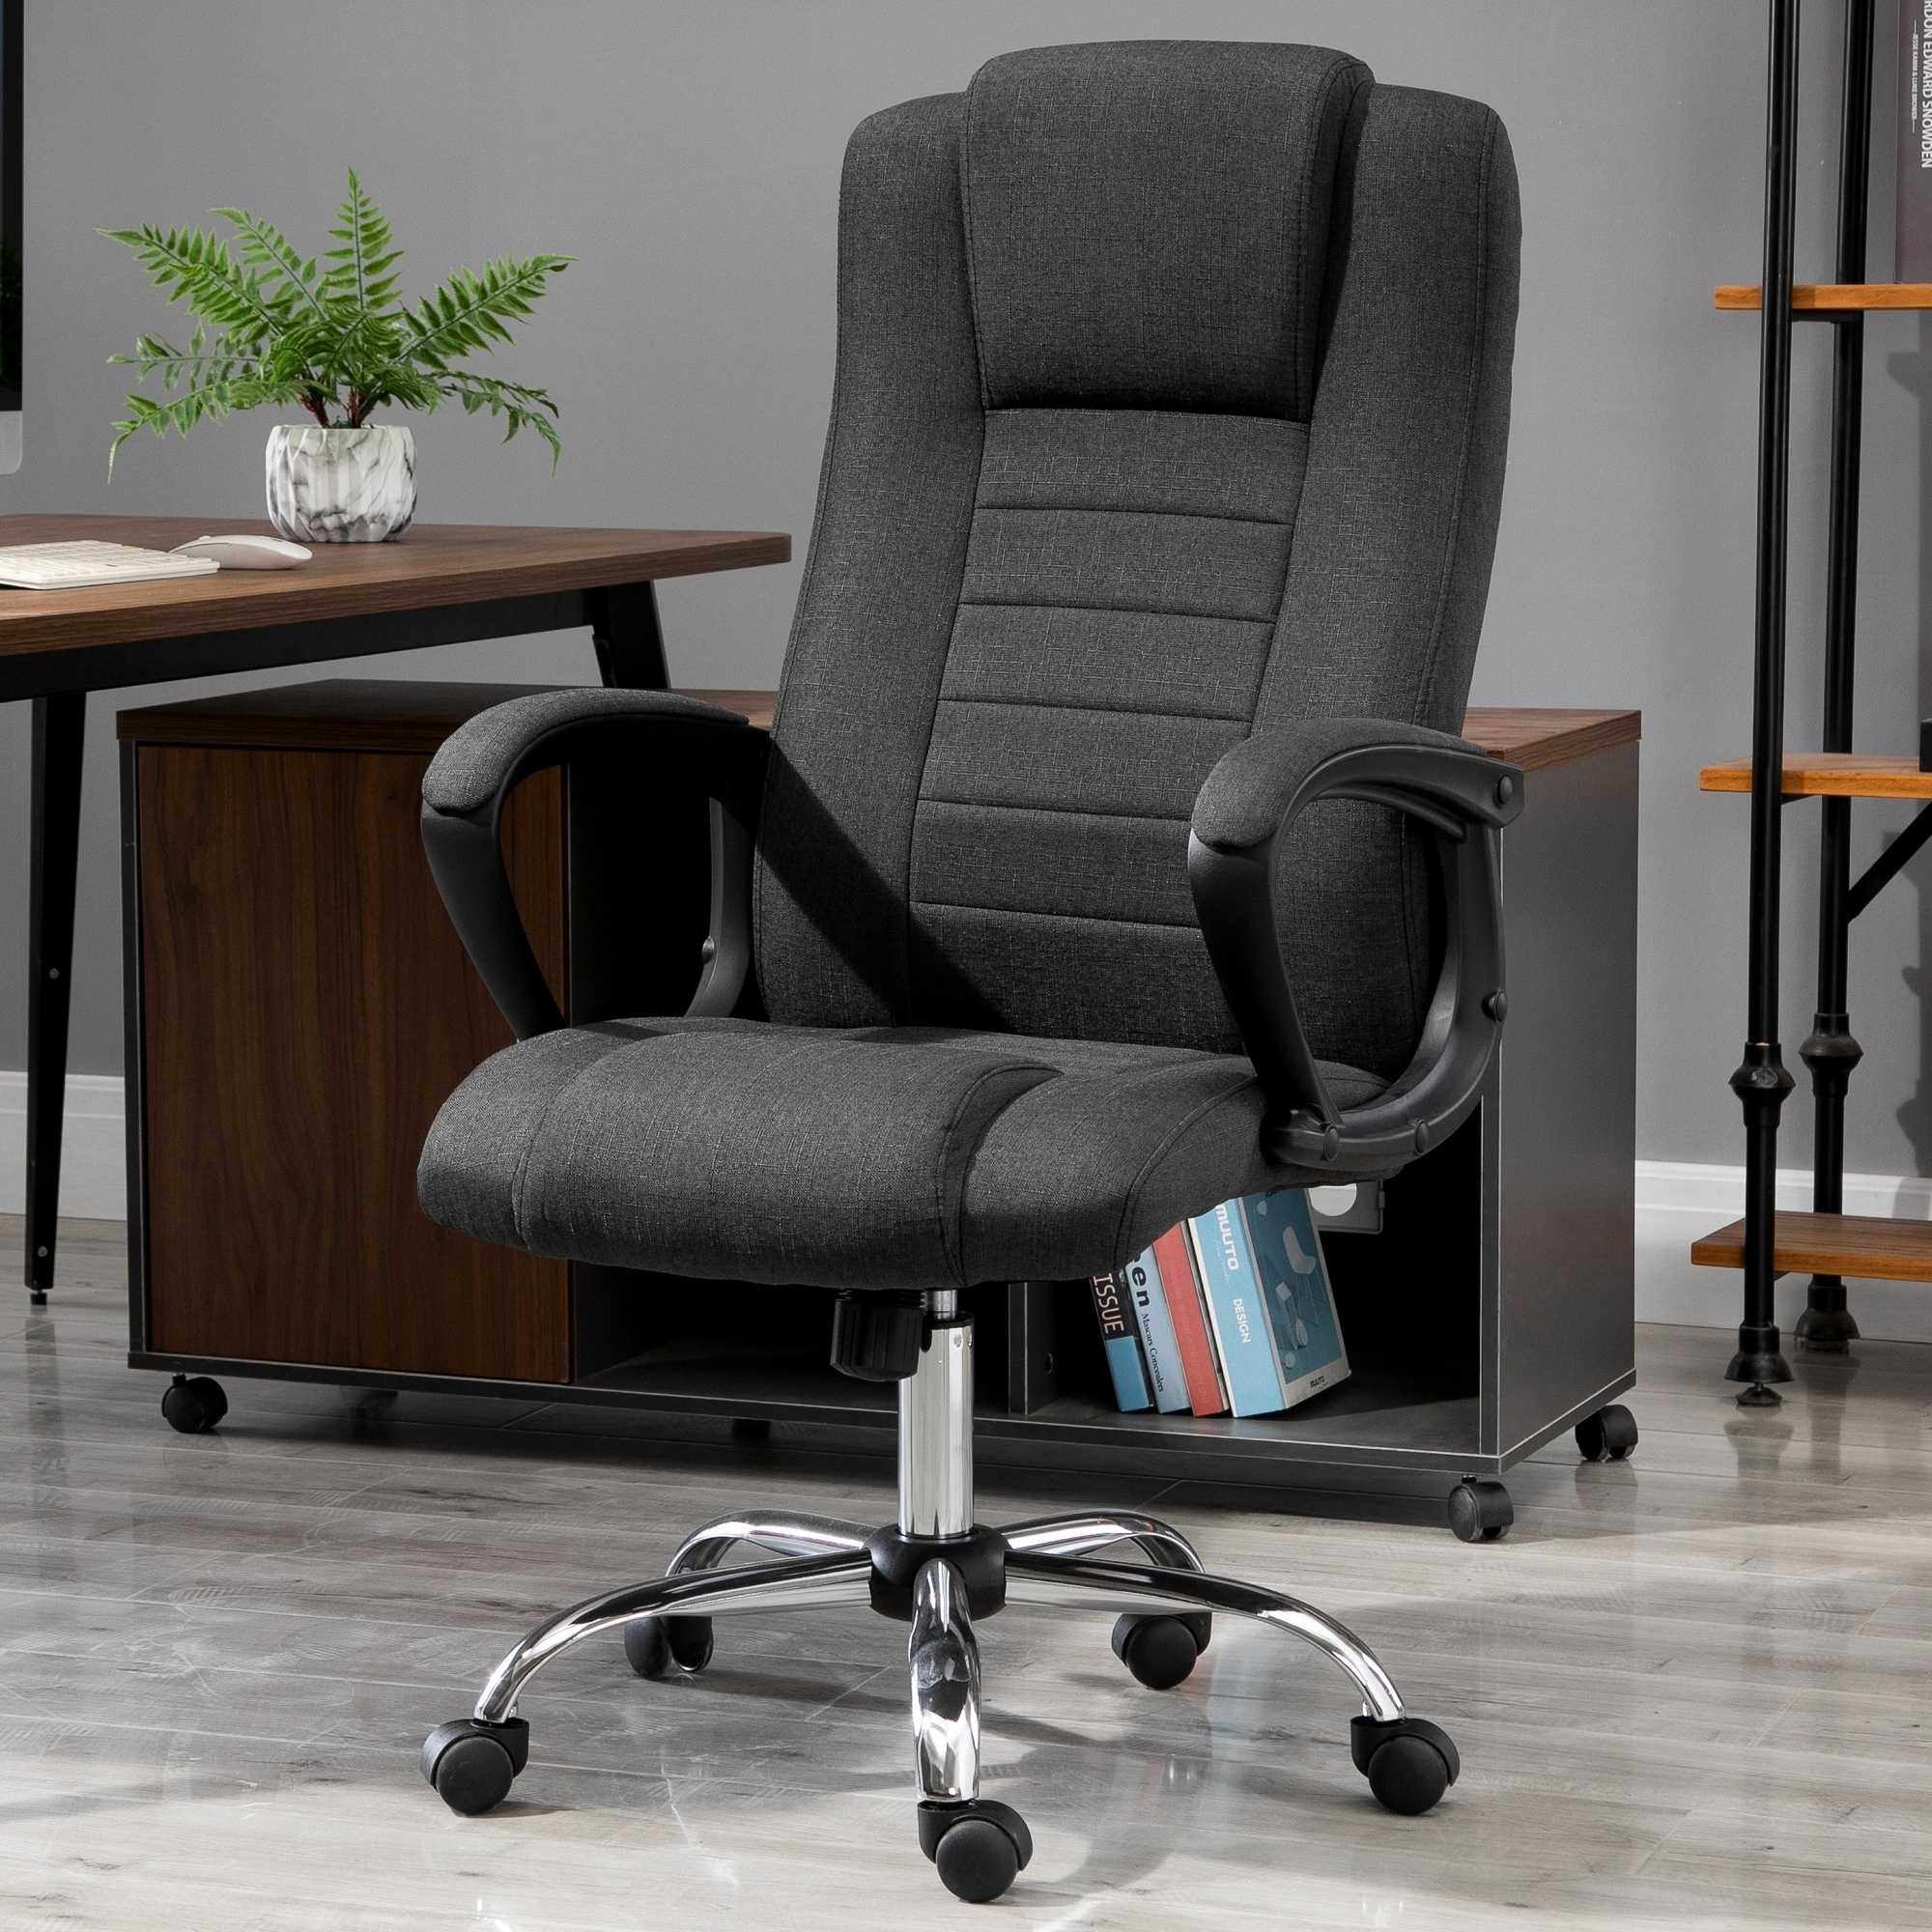 Vinsetto High Back 360 Swivel Executive Computer Office Chair With Adjustable Height Comfort Tilt Function Black On Sale Overstock 31661416